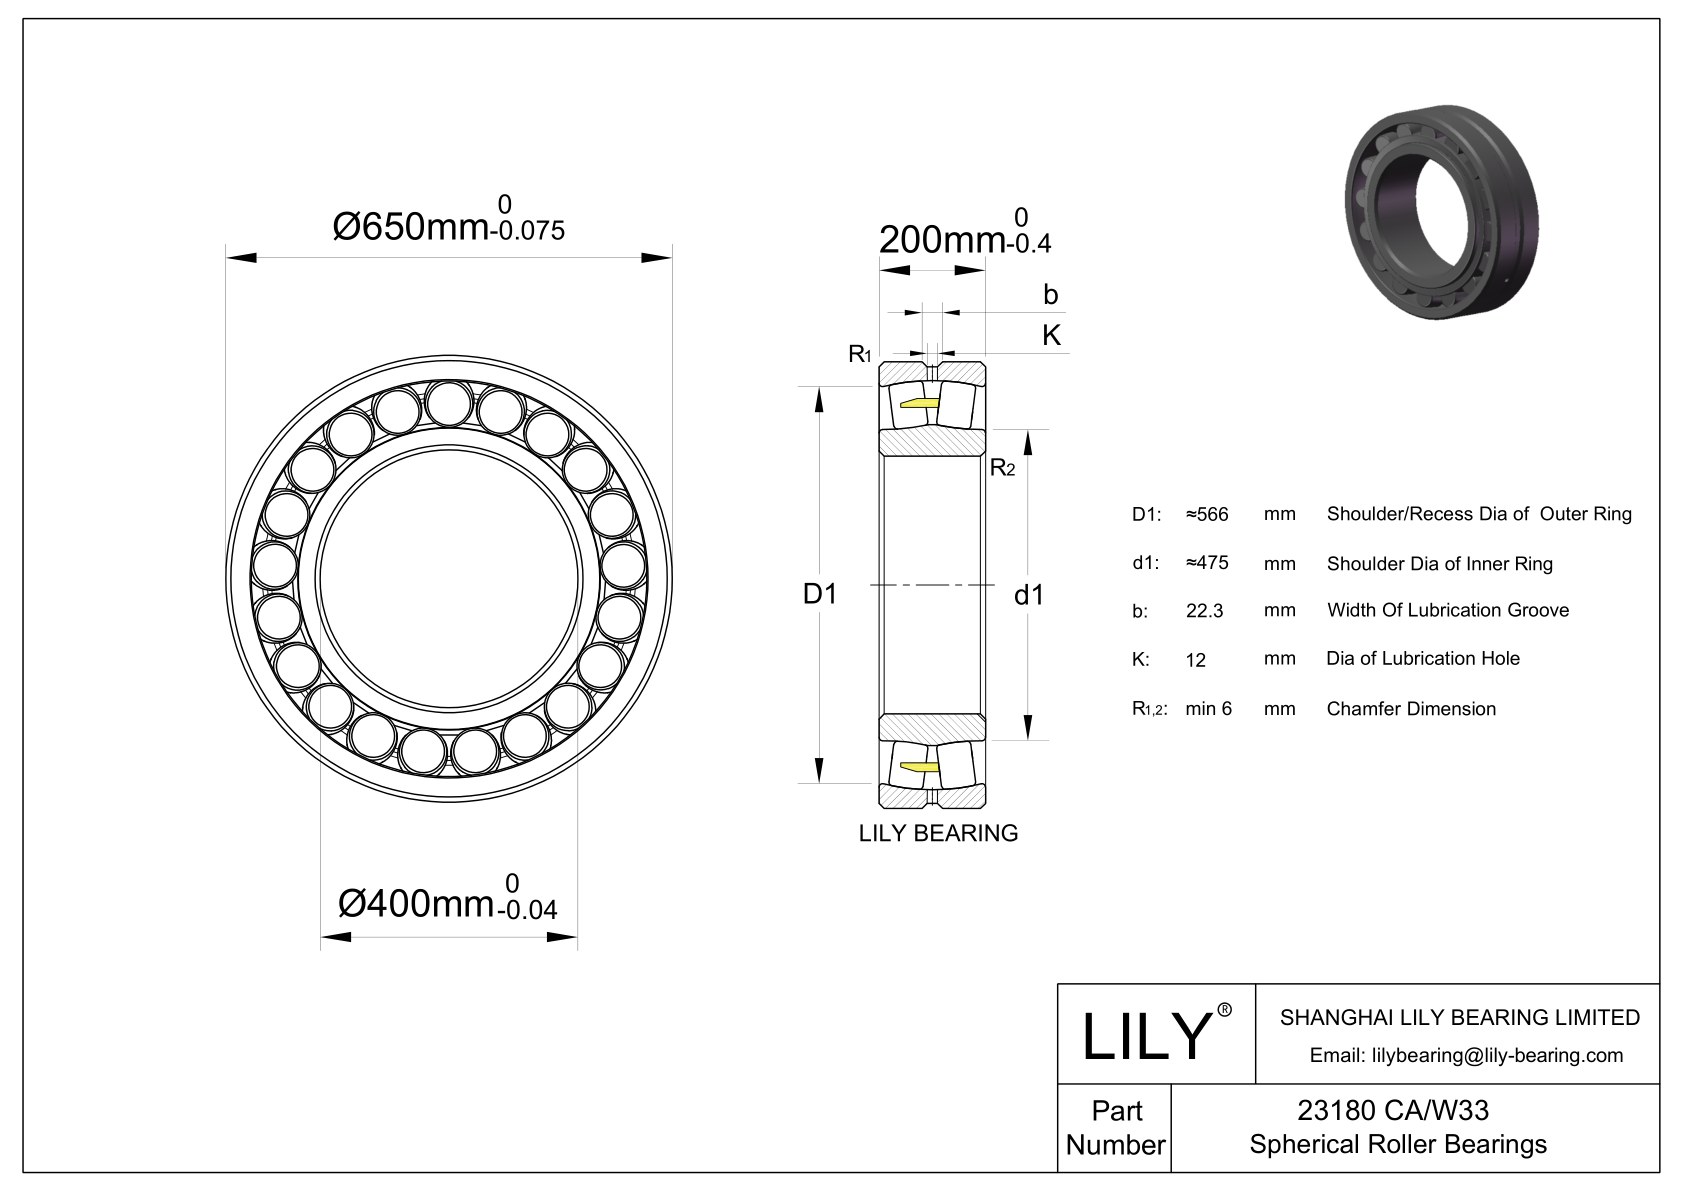 23180 CA/W33 Double Row Spherical Roller Bearing cad drawing